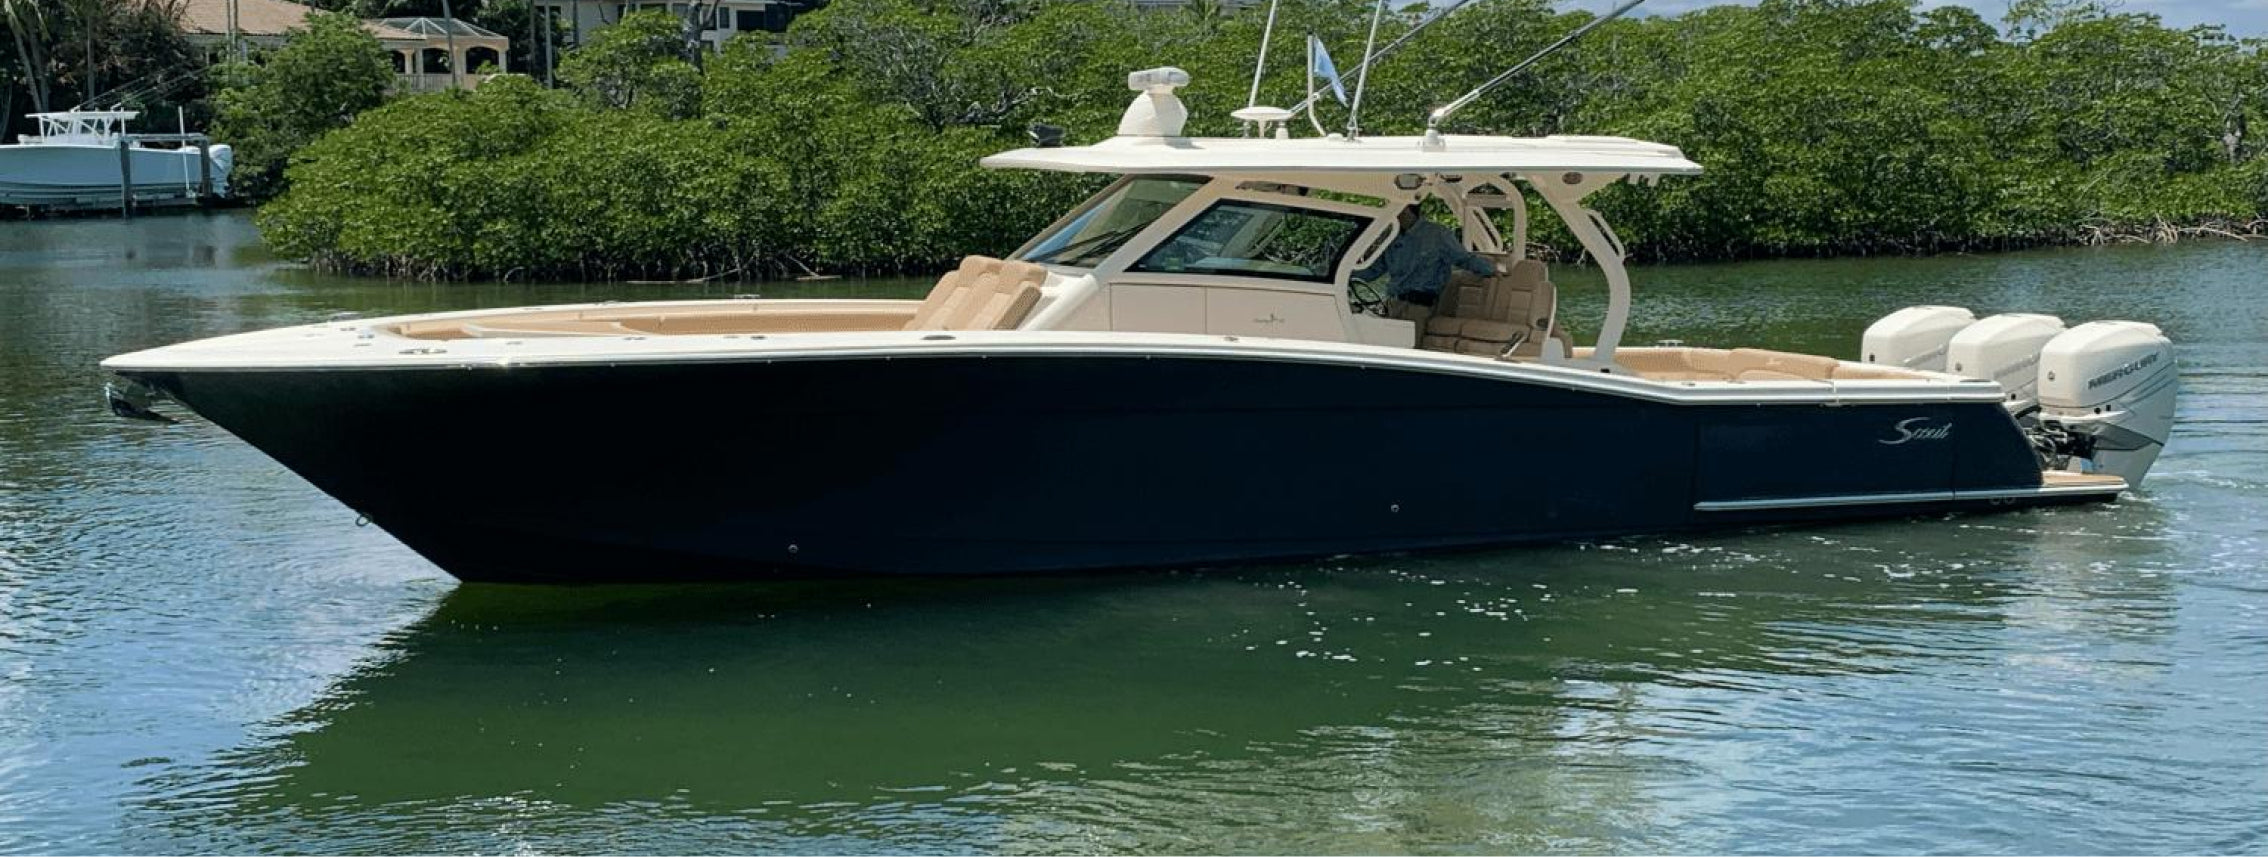 NO CHIPPING AND FADING ON BOAT LIFTS: SCOUT 380 LXF